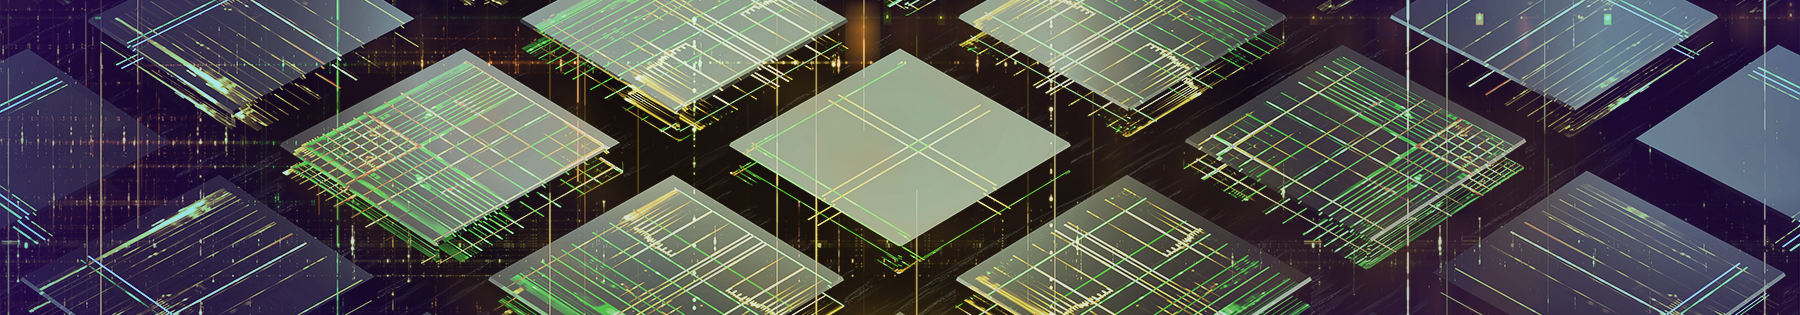 A concept image of a quantum computer with many translucent cores